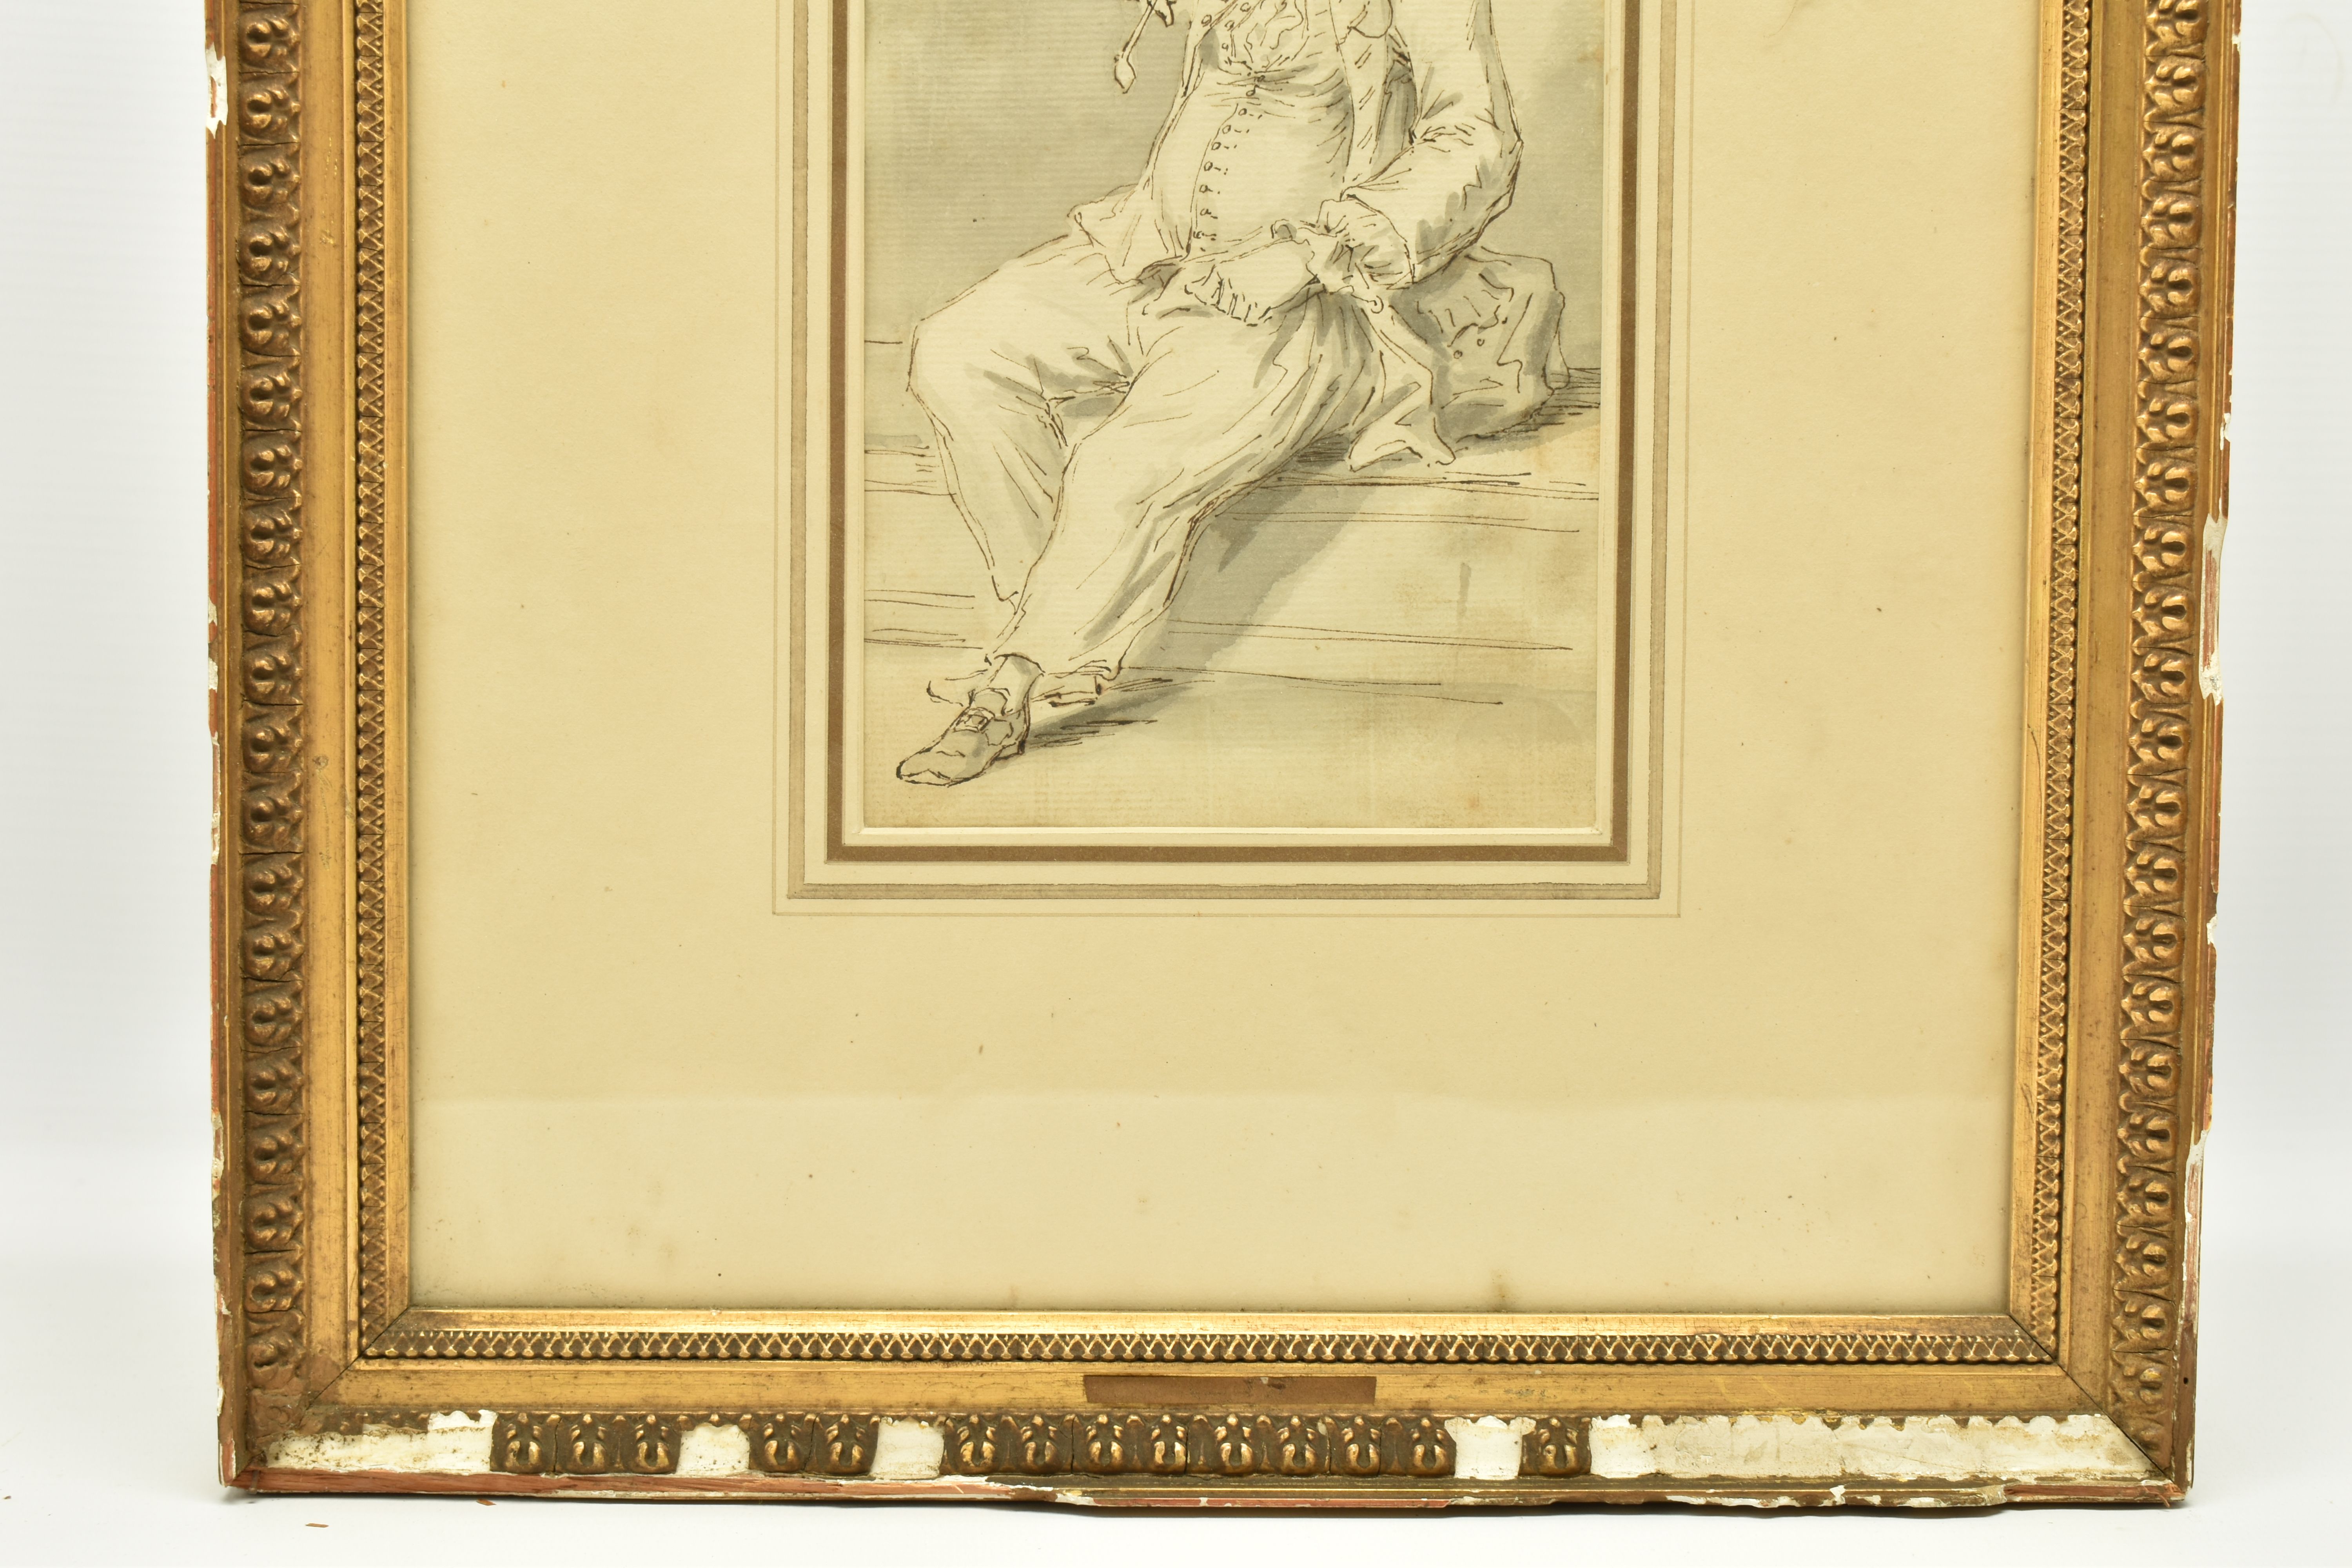 ATTRIBUTED TO LOUIS PHILIPPE BOITARD (?-circa 1770) A STUDY OF A SLEEPING MAN WITH A PIPE, unsigned, - Image 4 of 7